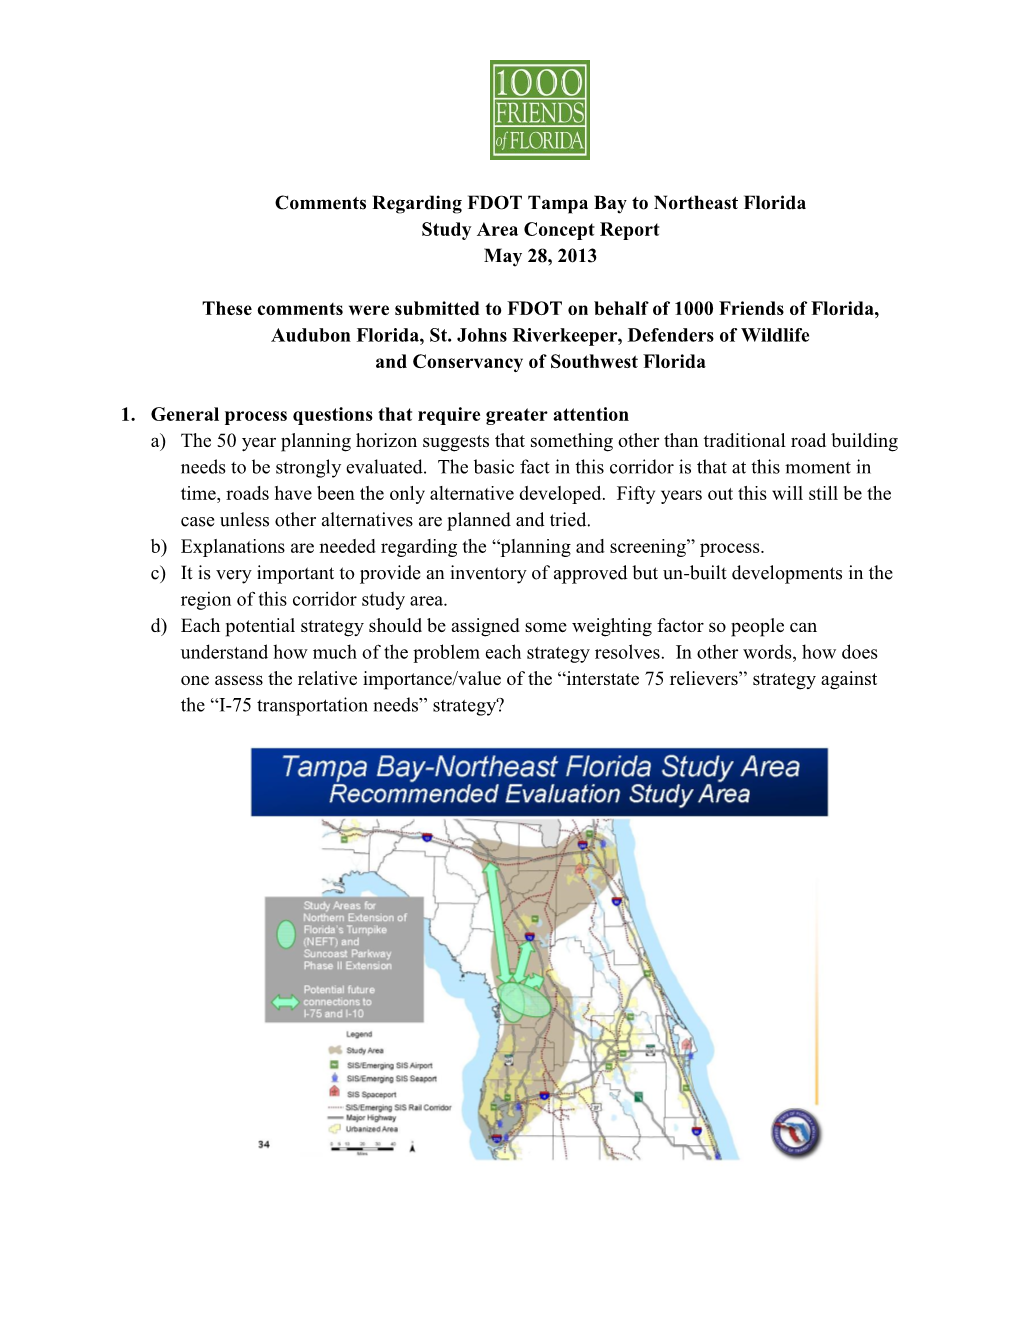 Comments Regarding FDOT Tampa Bay to Northeast Florida Study Area Concept Report May 28, 2013